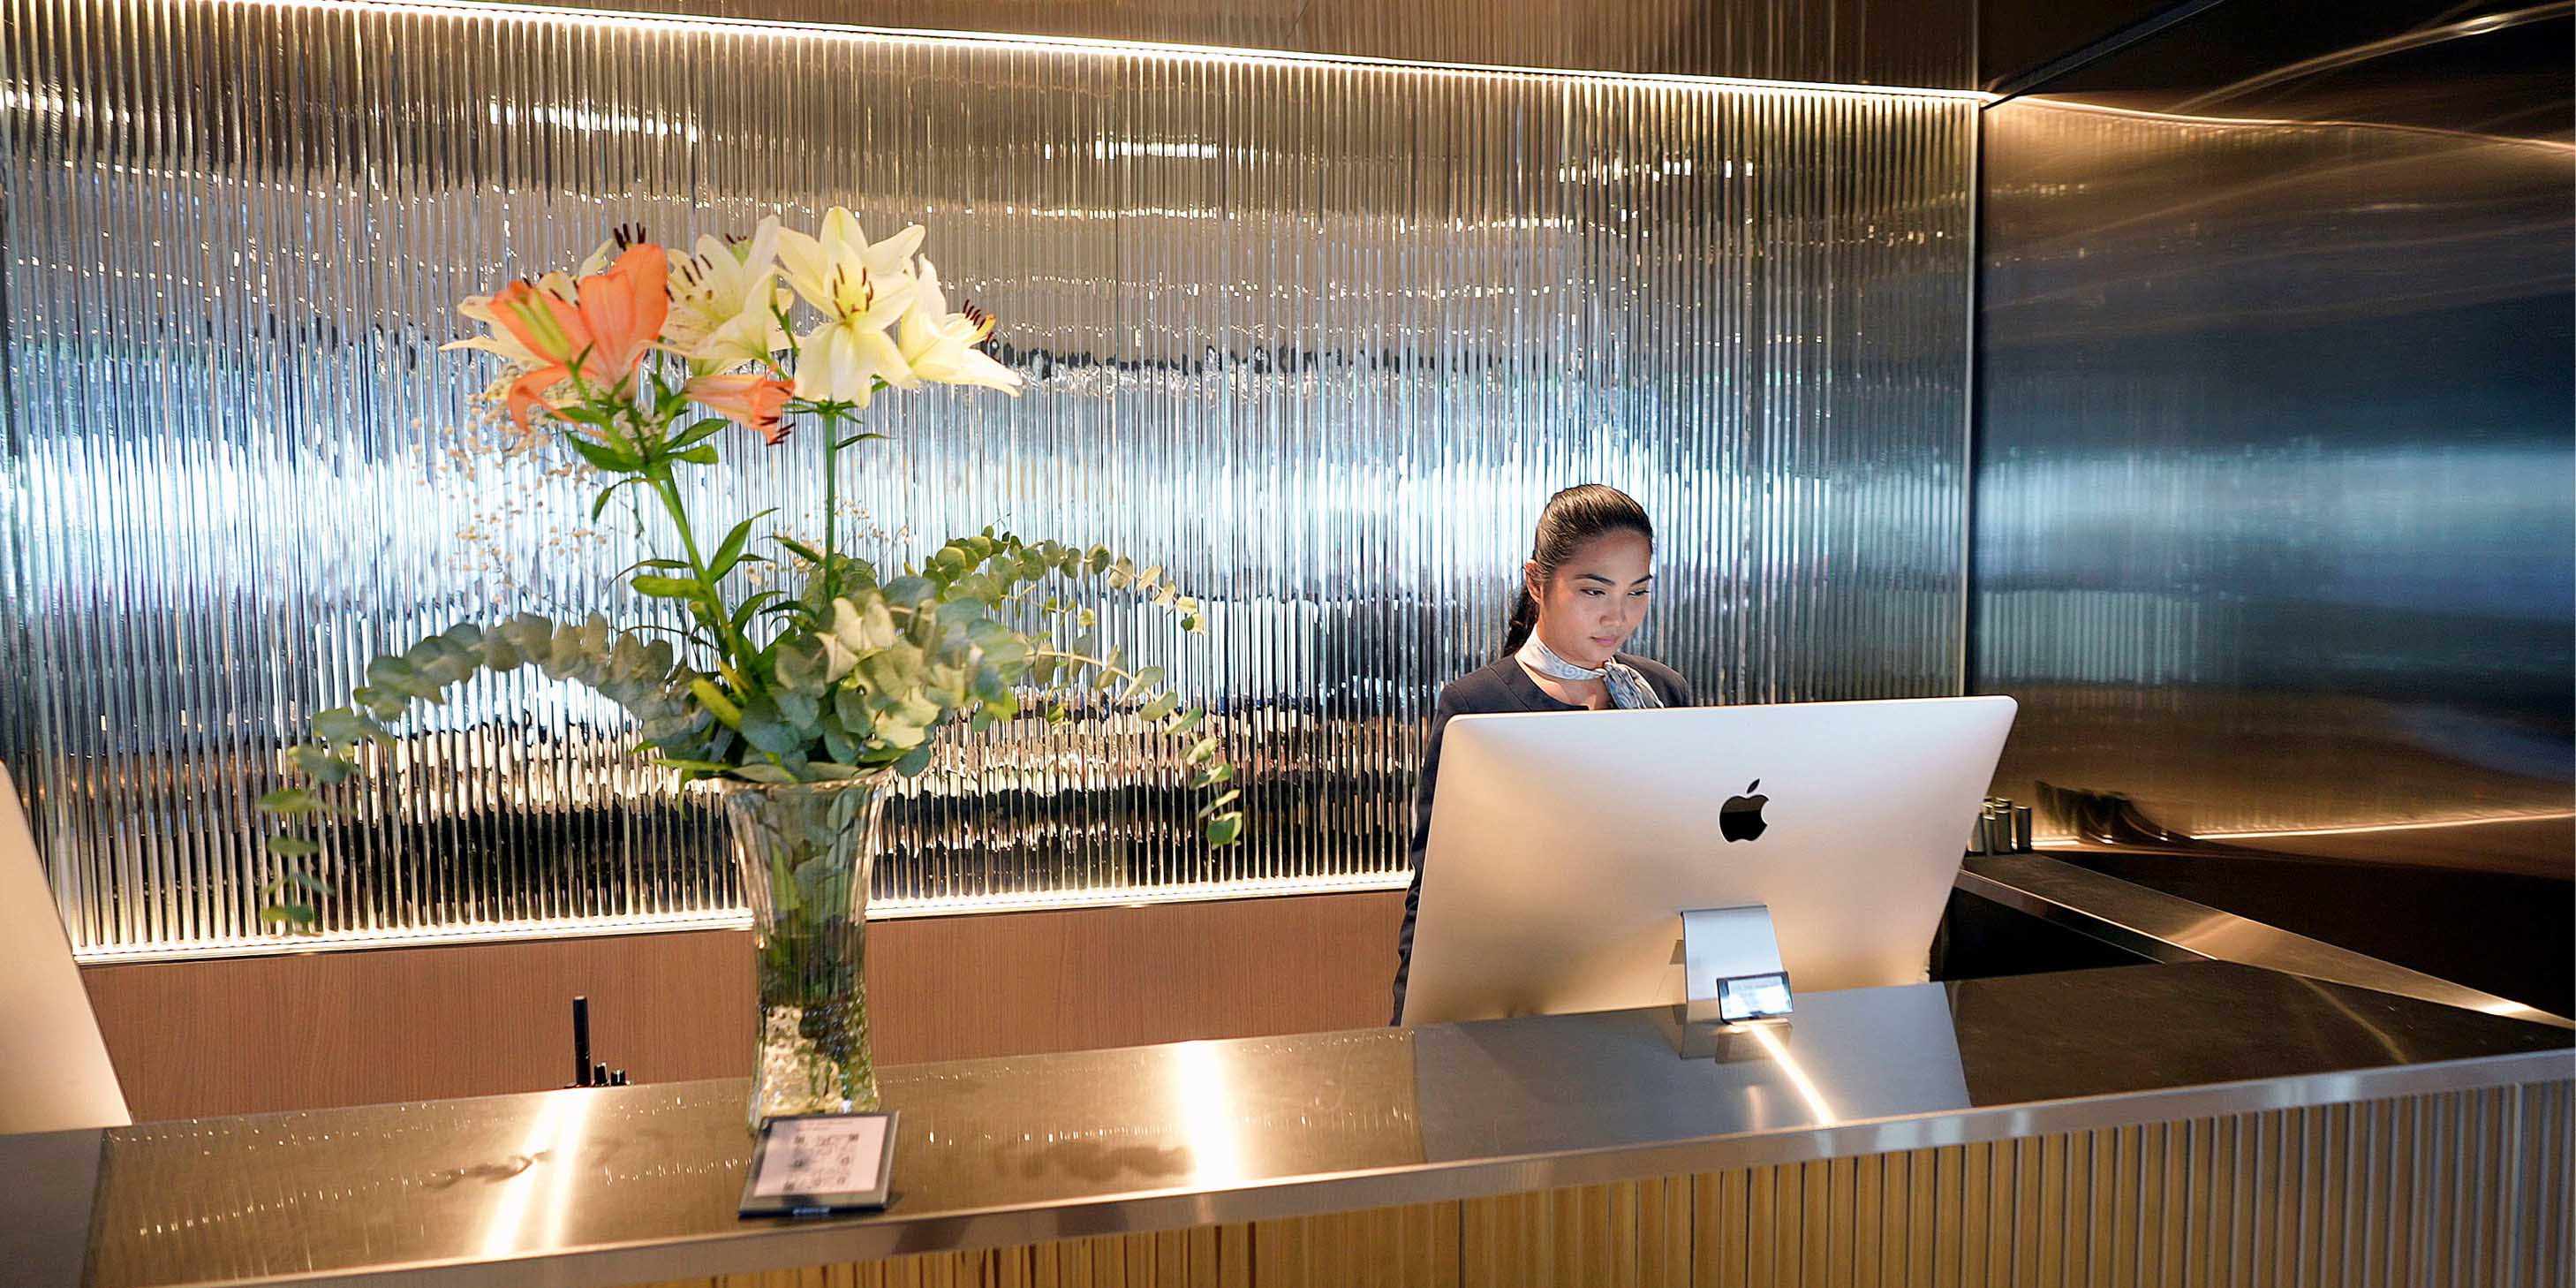 flowers in a vase on top of the reception desk with a staff member standing behind a computer screen working